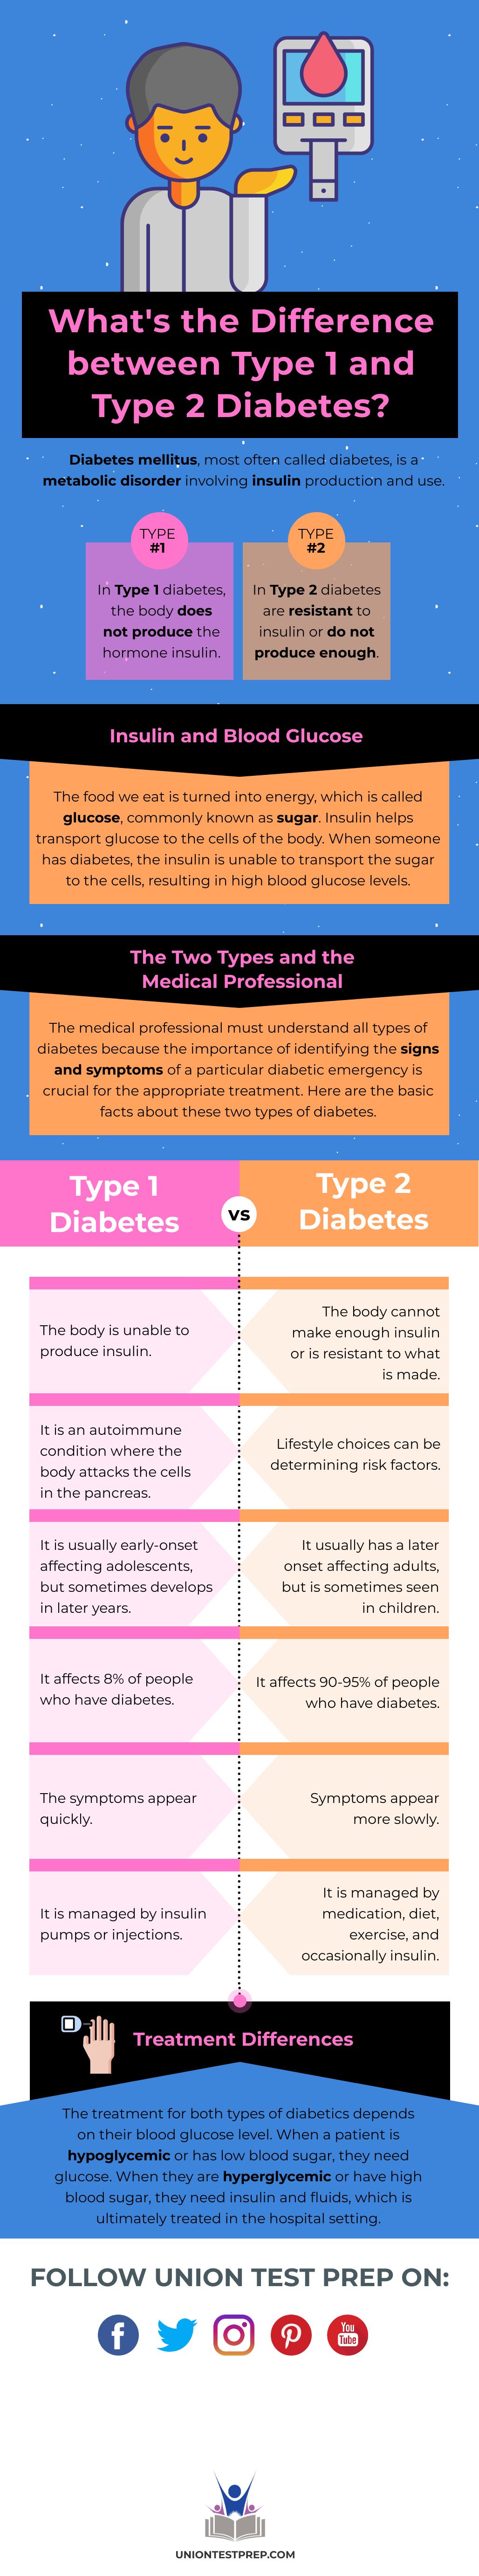 Whats the Difference Between Type 1 and Type 2 Diabetes